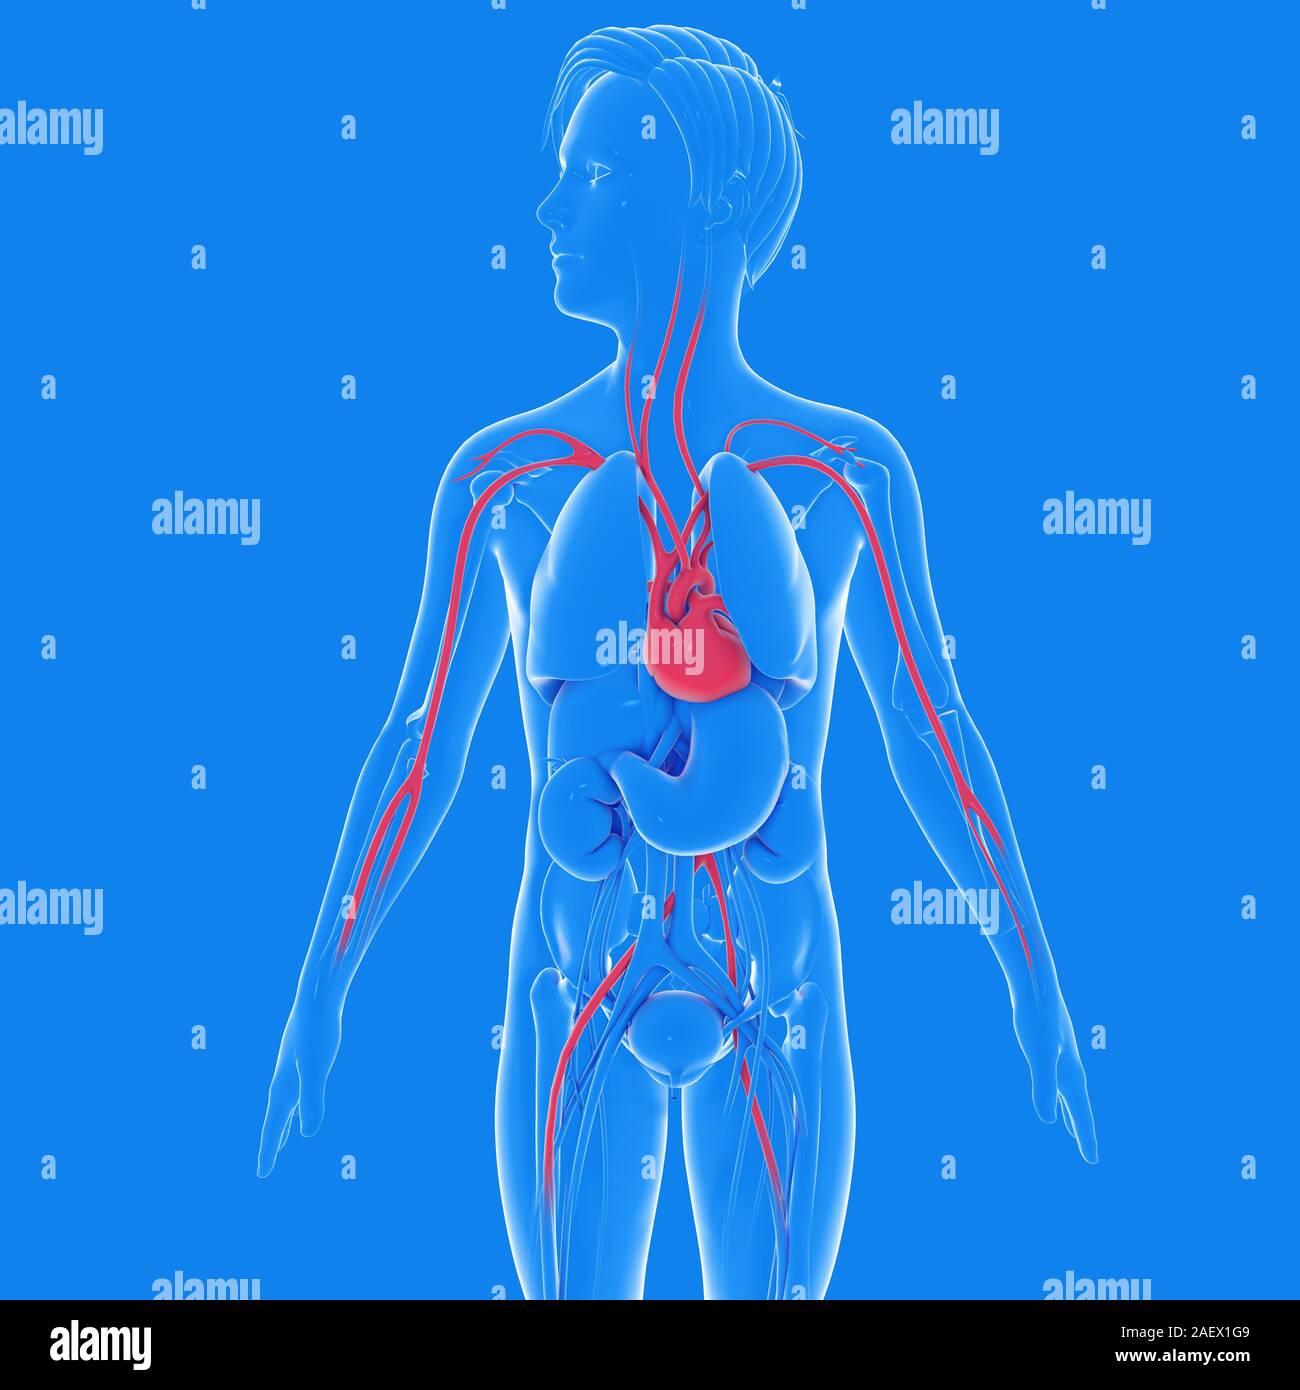 3d illustration of the interior of a man's anatomy, with graphic style. Showing internal organs. highlighting the heart and the circulatory system. Stock Photo